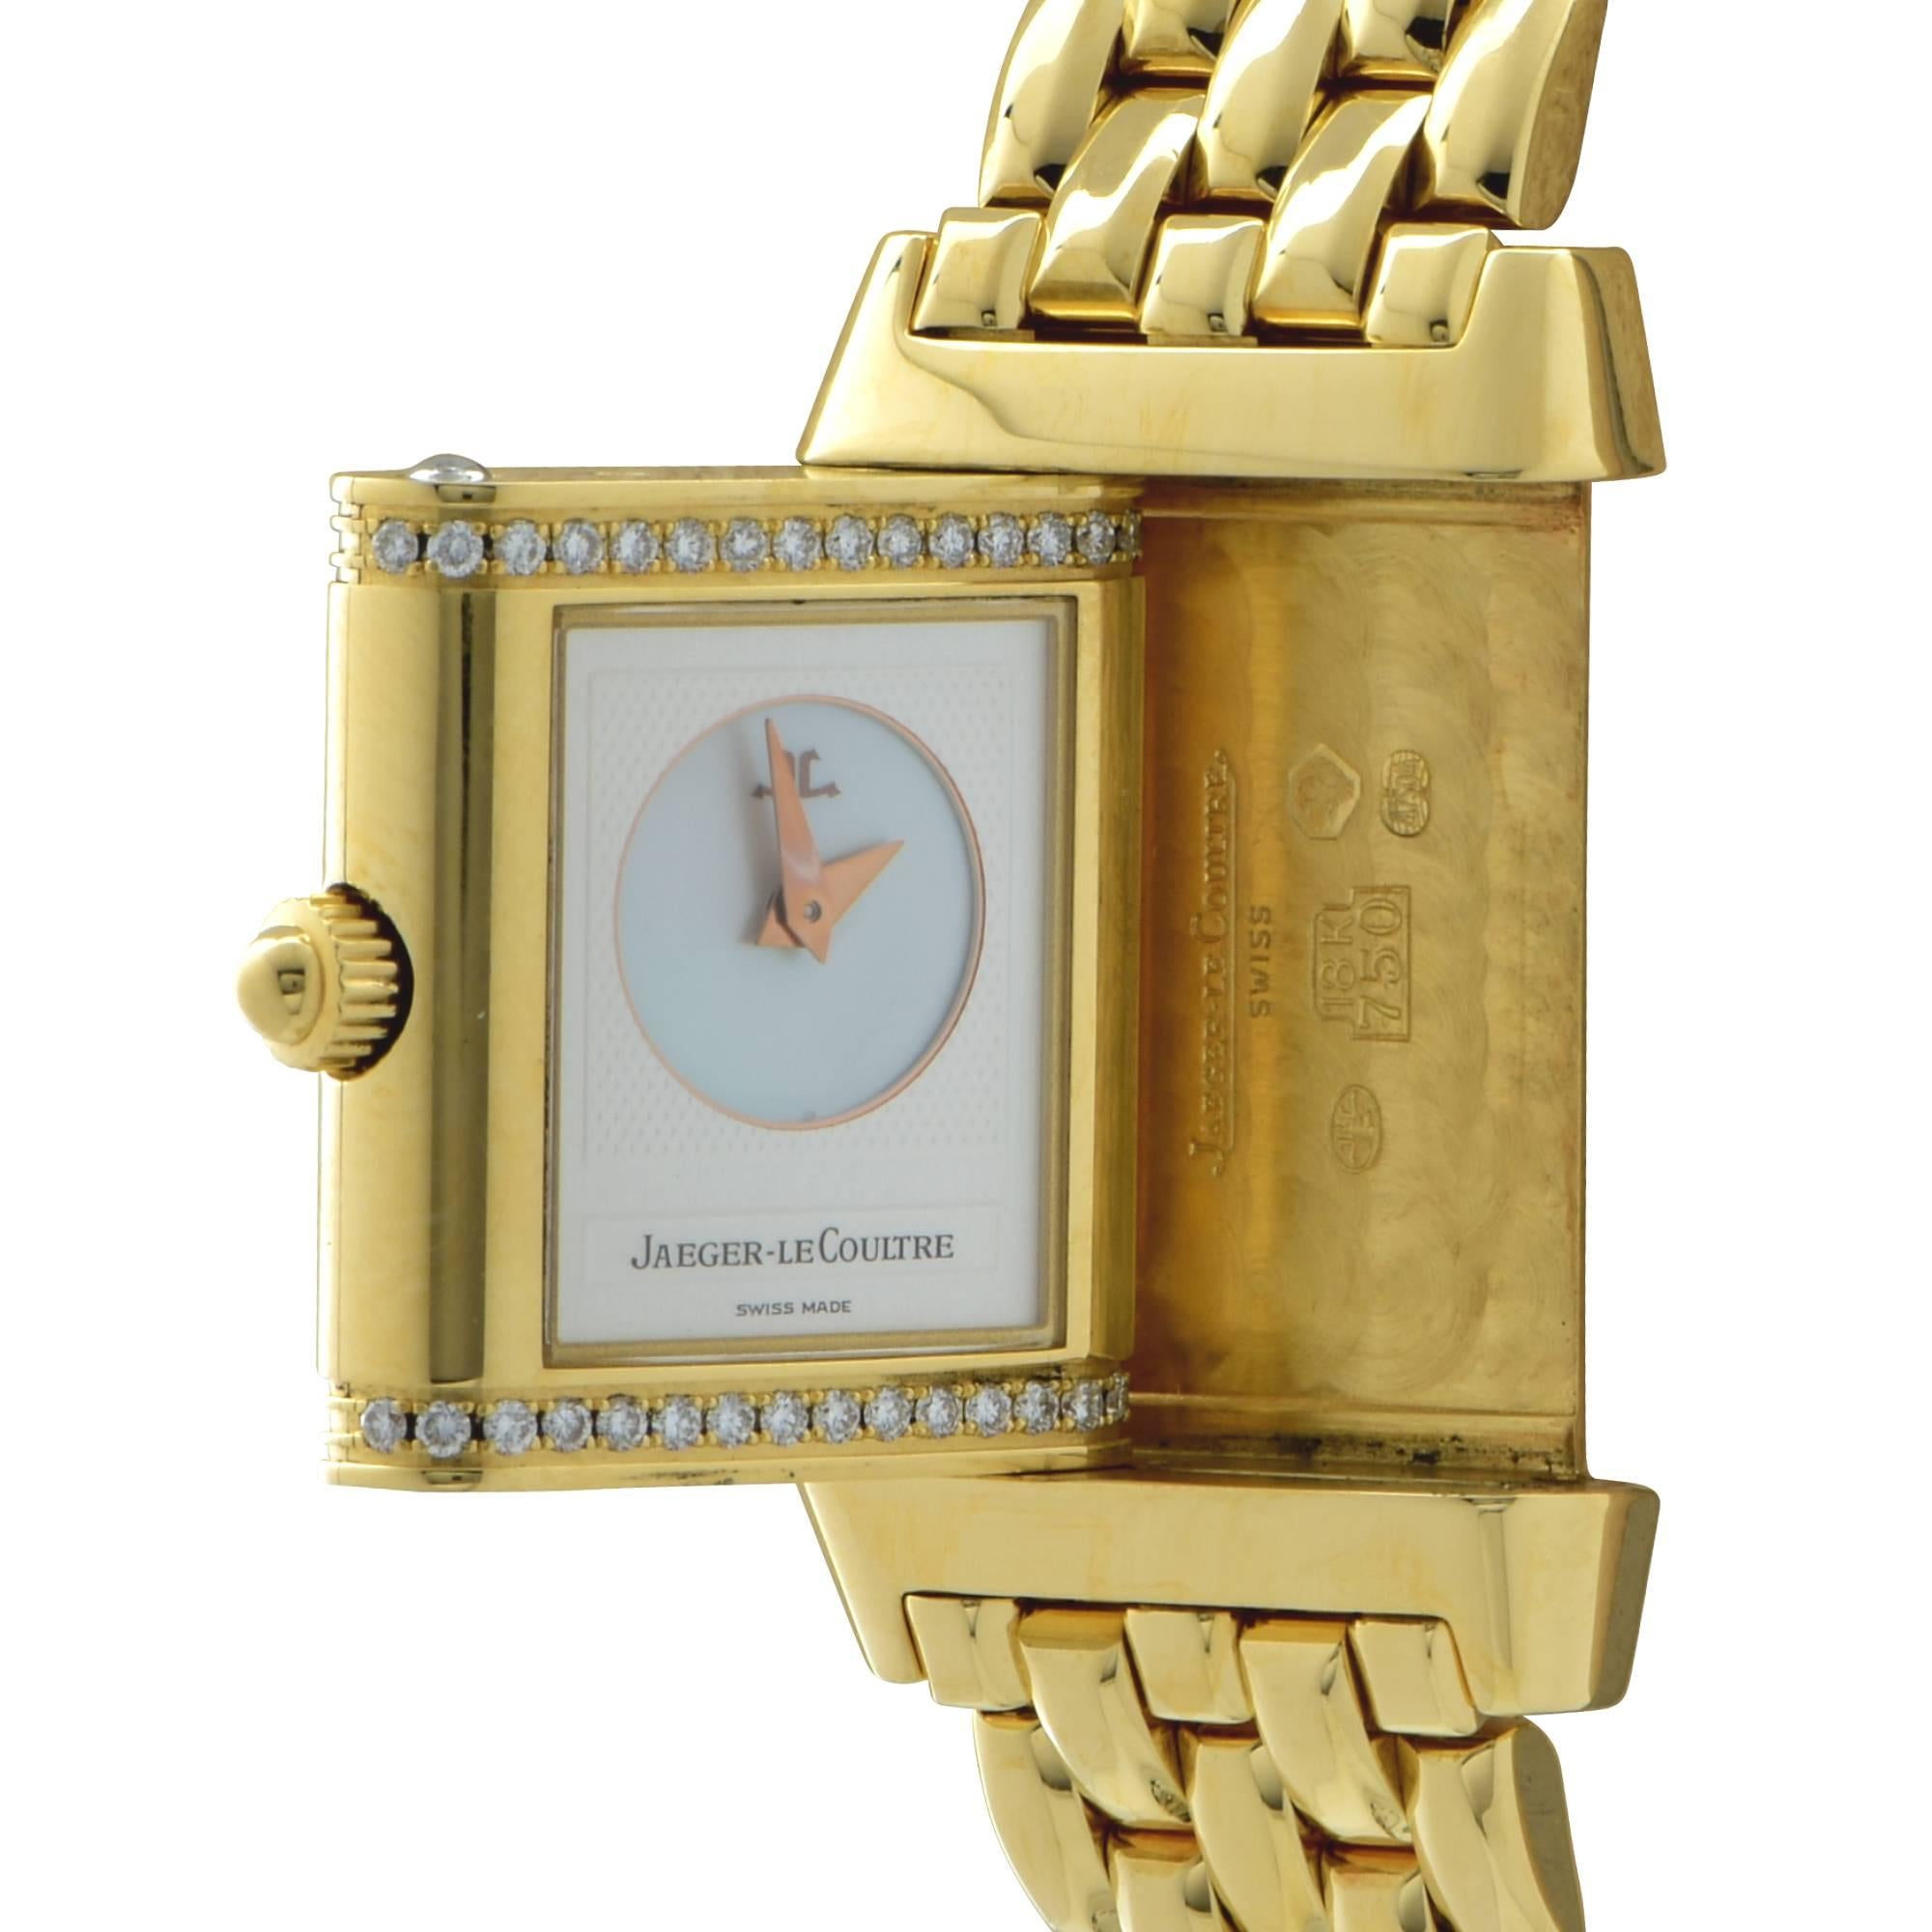 Jaeger-LeCoultre Reverso Duetto ladies wristwatch reference number 2141866 crafted in 18k yellow gold and studded with 32 round brilliant cut diamonds. The watch has a 21 mm diameter and 33 mm length, sapphire crystals.  This timeless and feminine